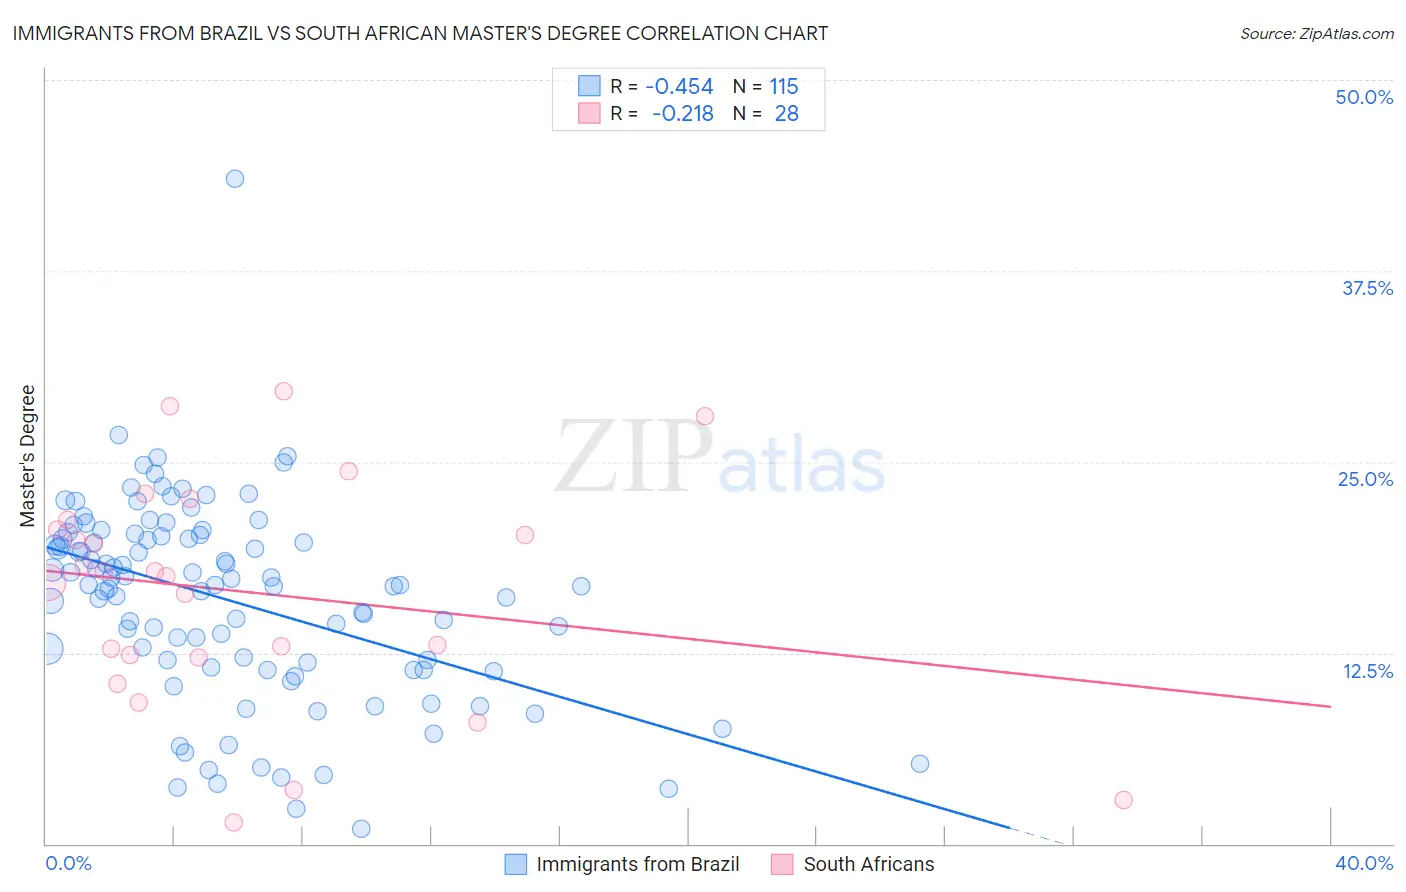 Immigrants from Brazil vs South African Master's Degree